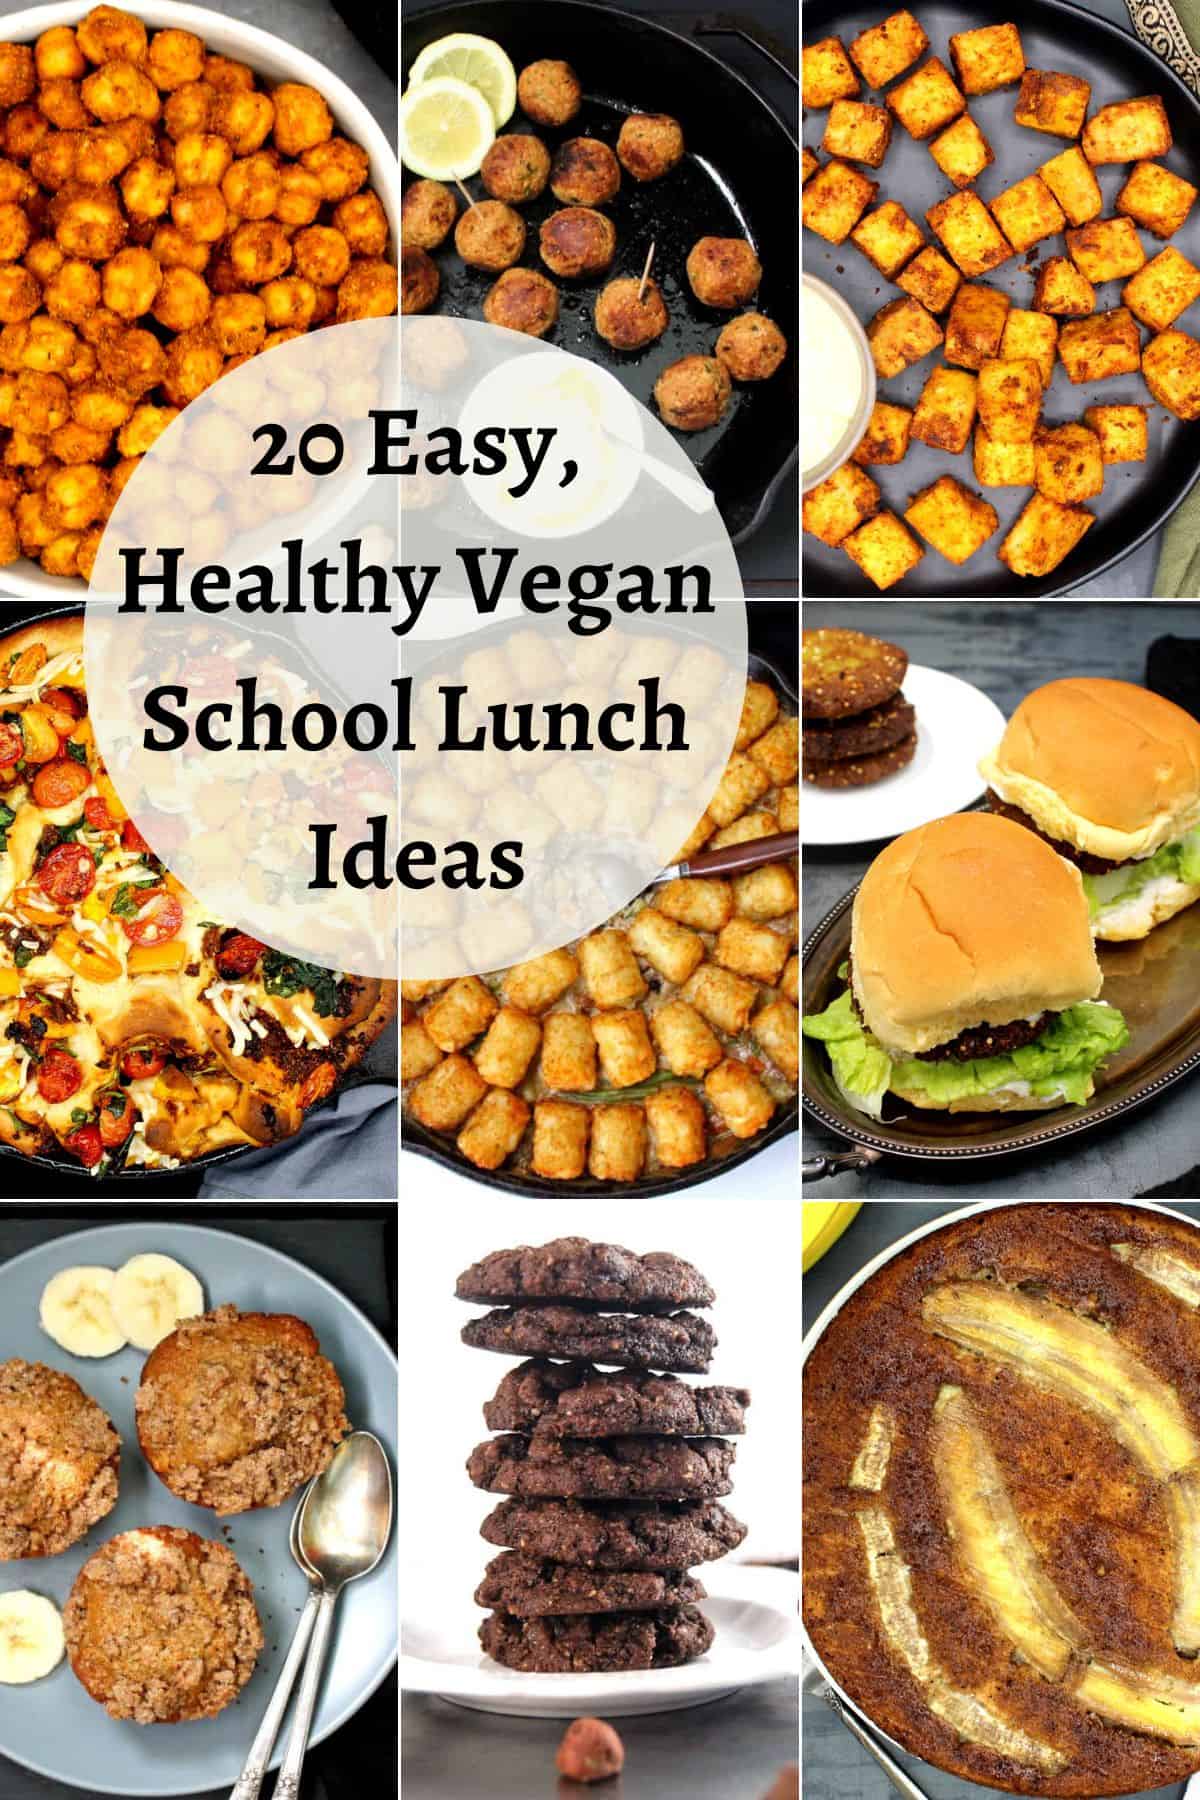 Images of healthy school lunch ideas with text that says 20 easy, healthy vegan school lunch ideas.